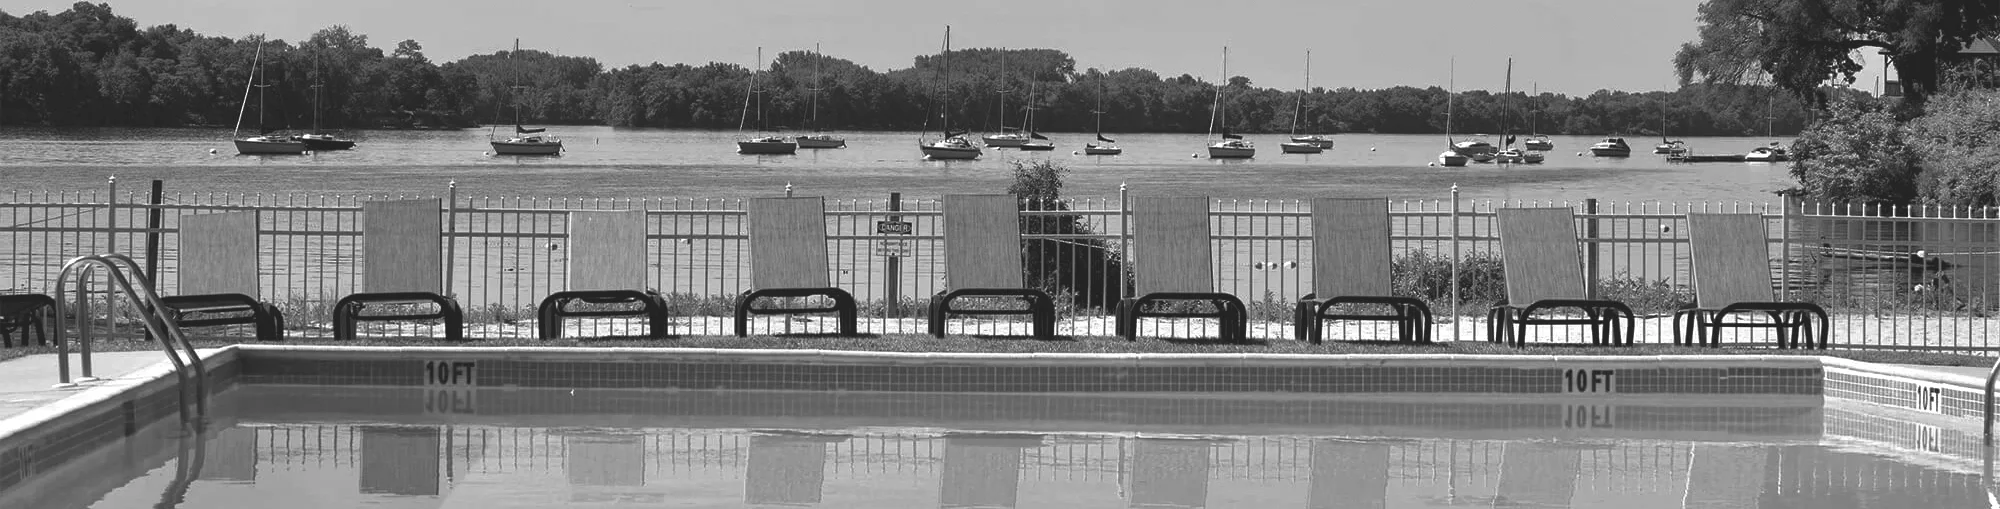 Black and white photo of Line of boats on the Delaware river besides the warm blue pool at Salem Harbour